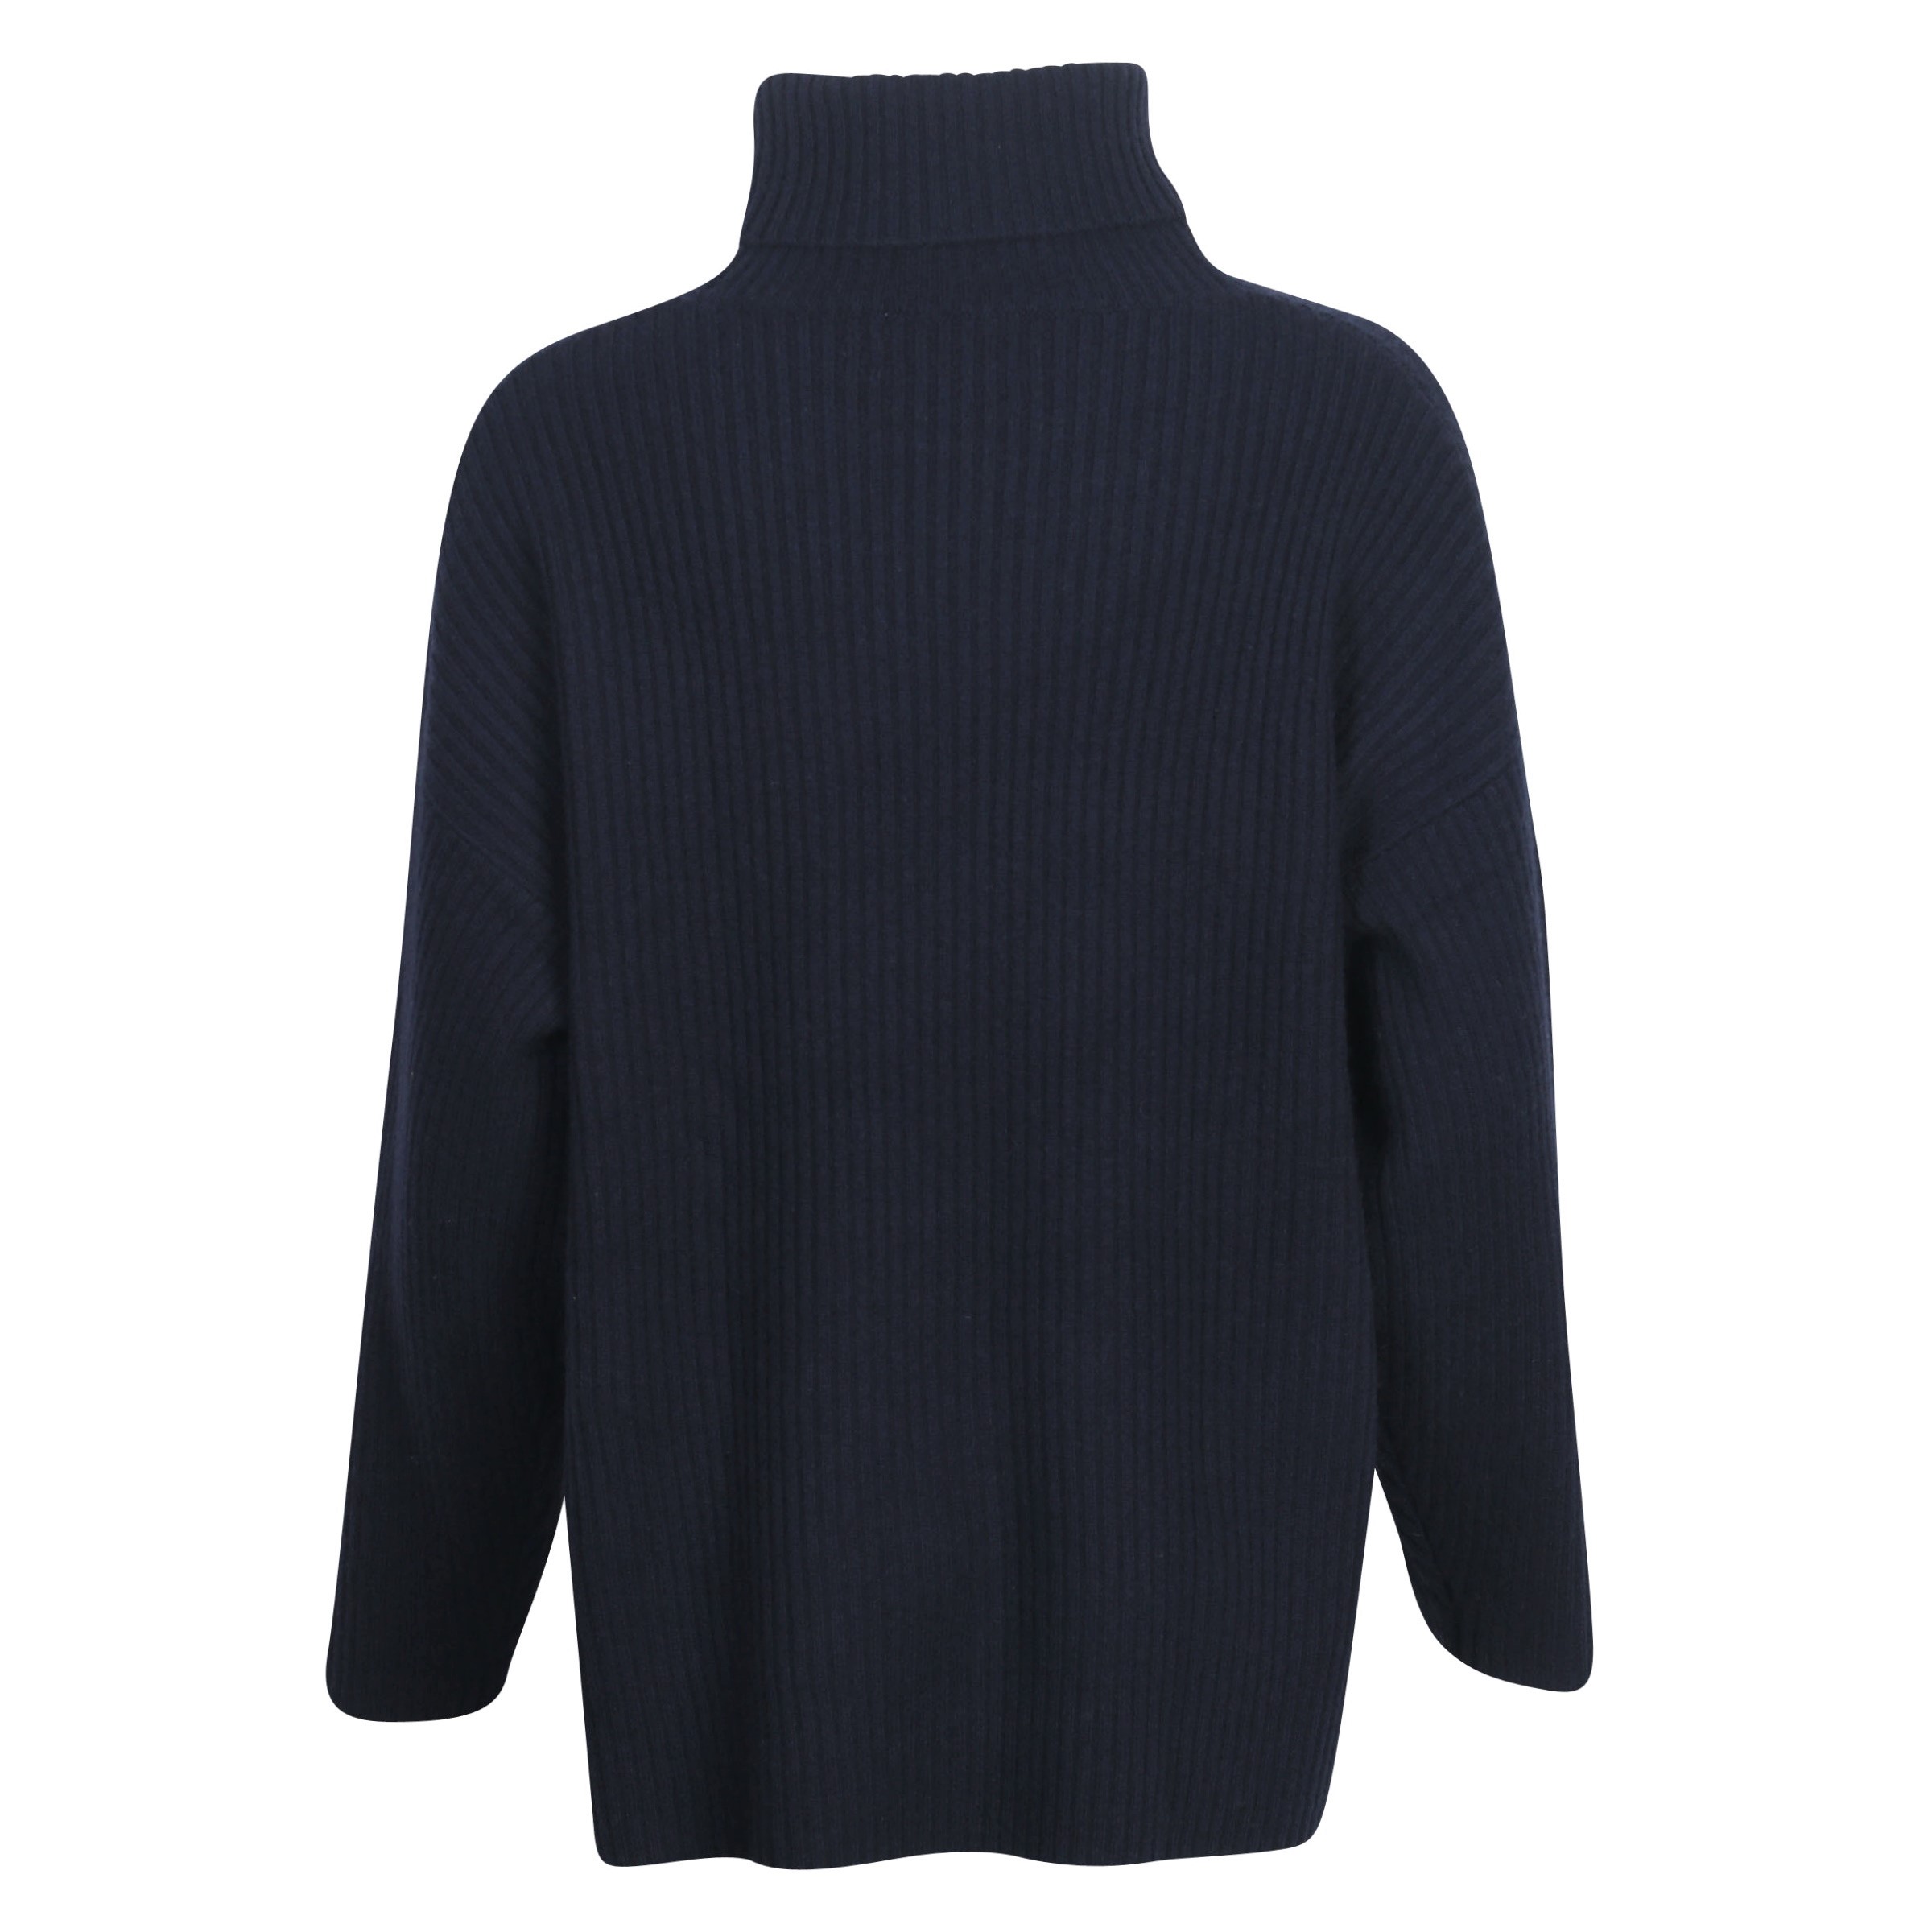 Flona Cashmere Turtle Neck Sweater in Navy